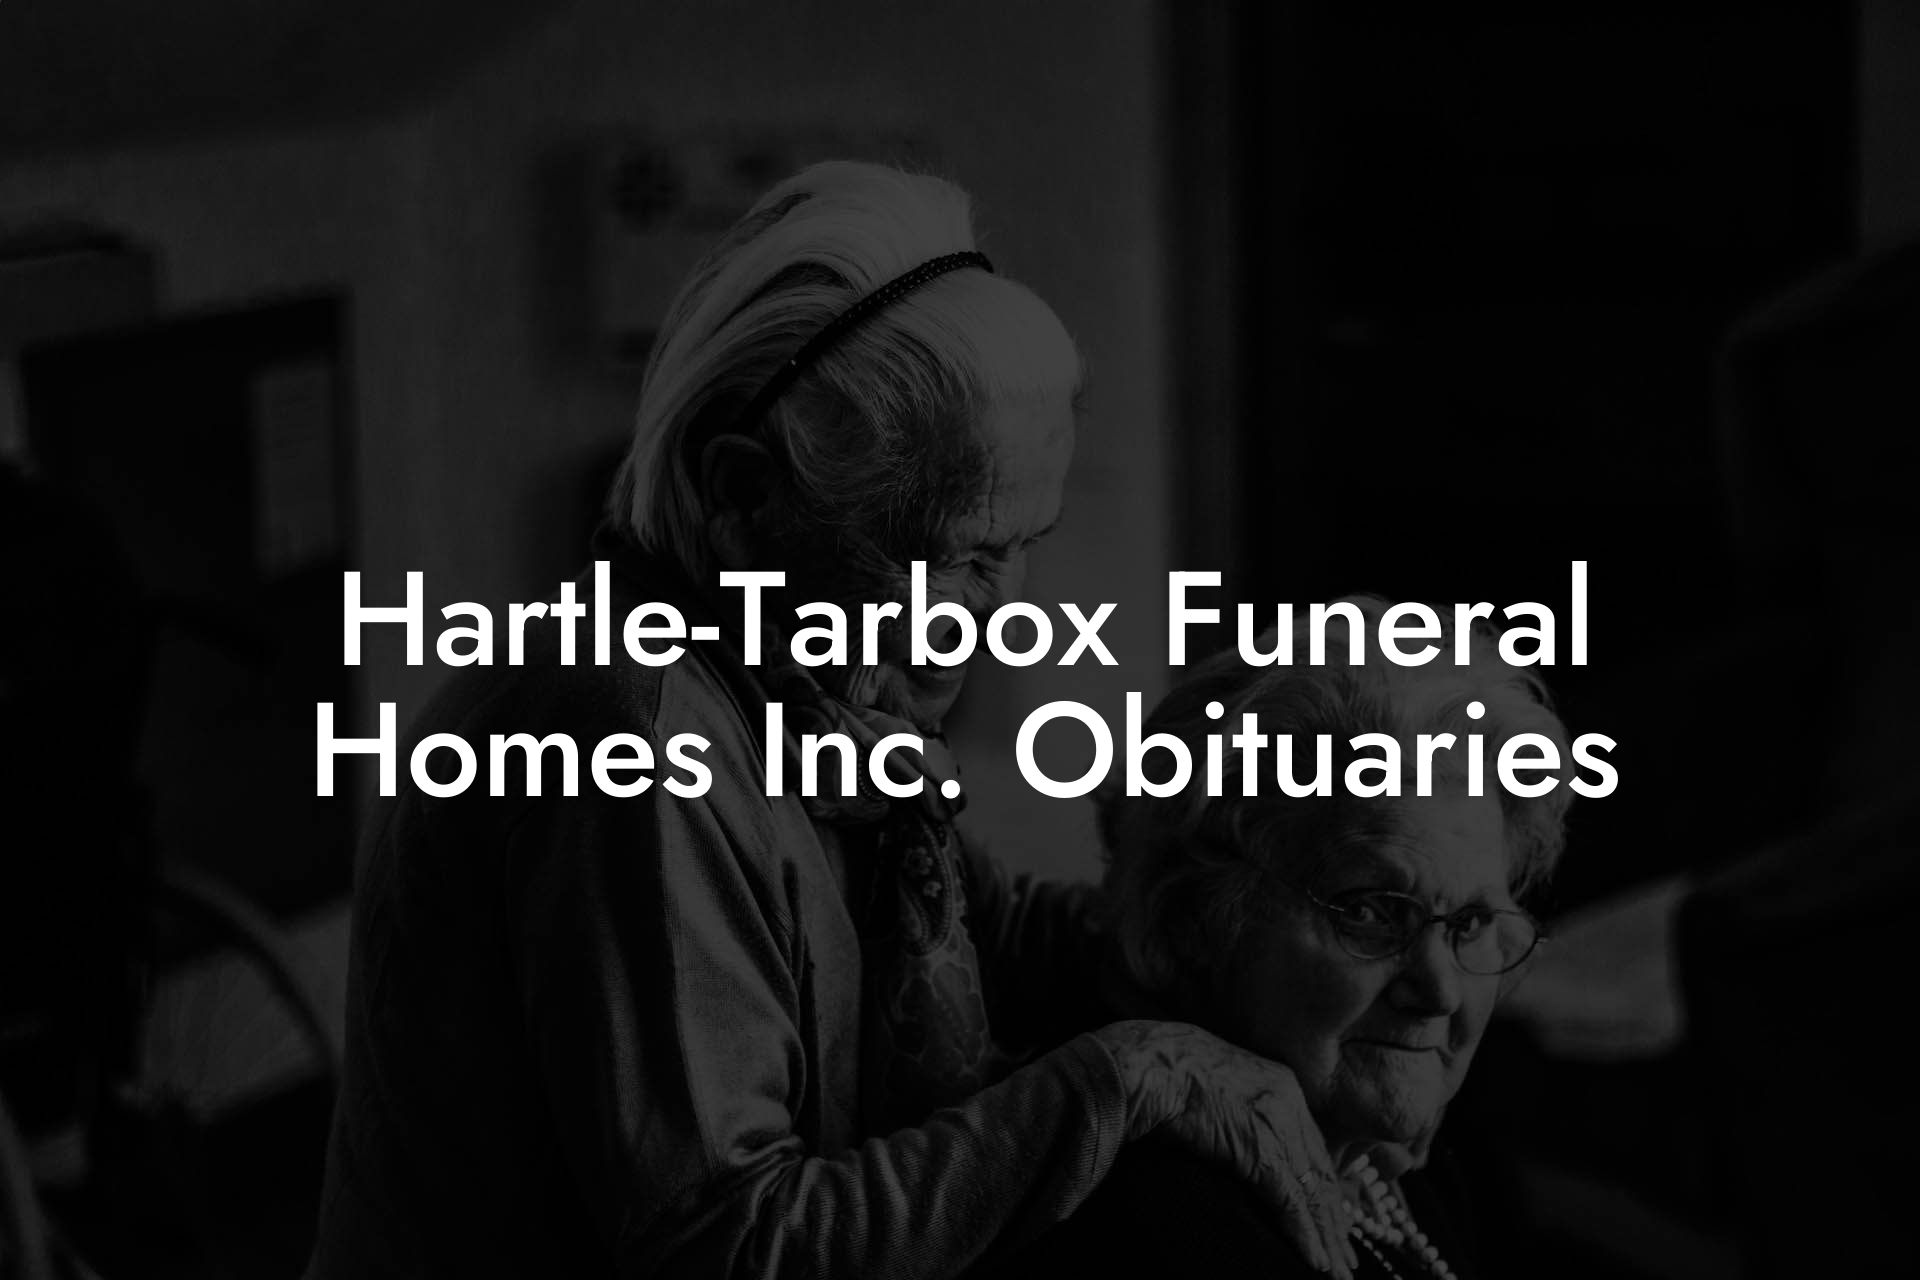 Hartle-Tarbox Funeral Homes Inc. Obituaries